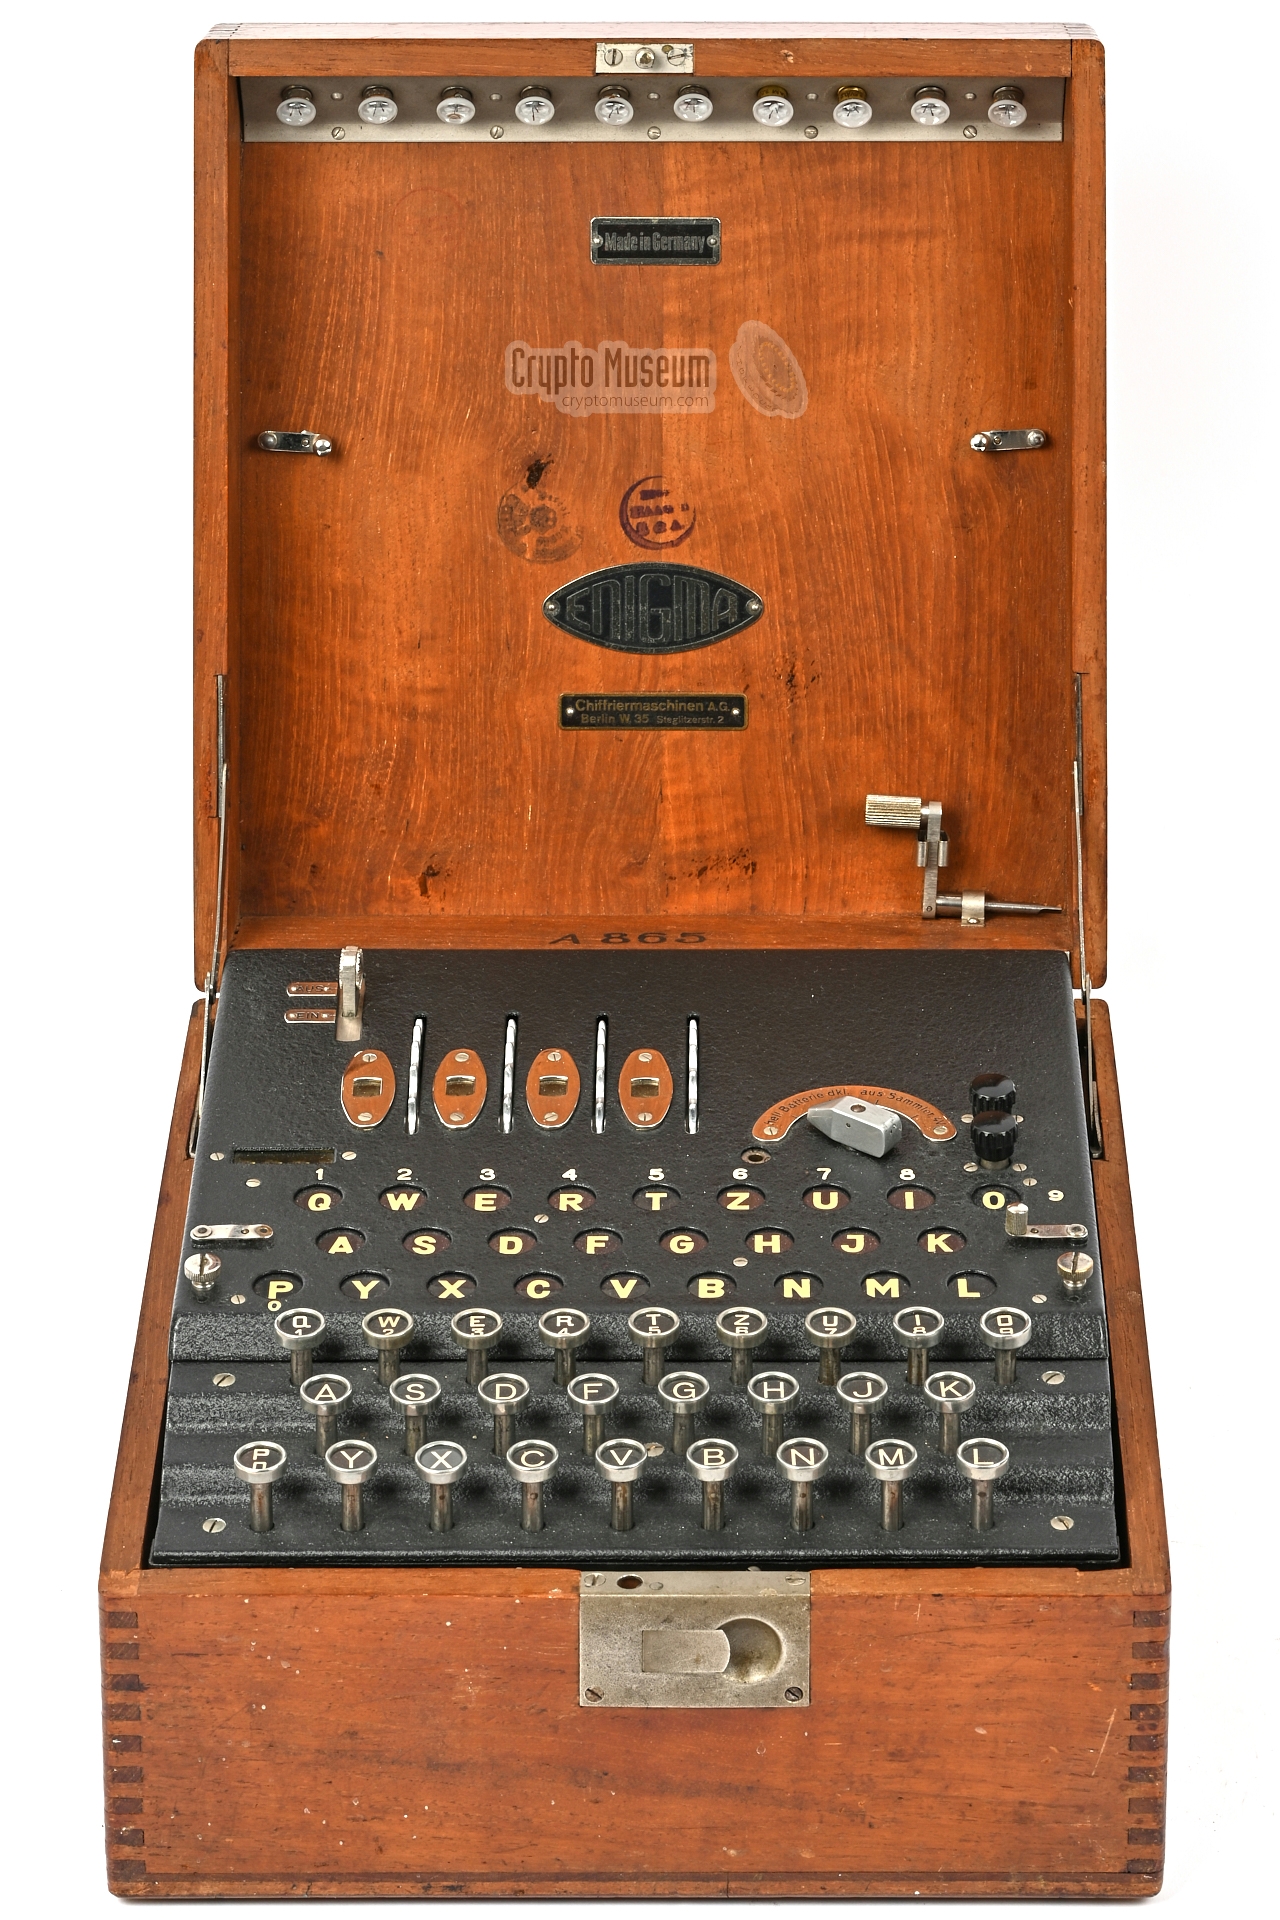 Zählwerk Enigma A28 (A865) - front view